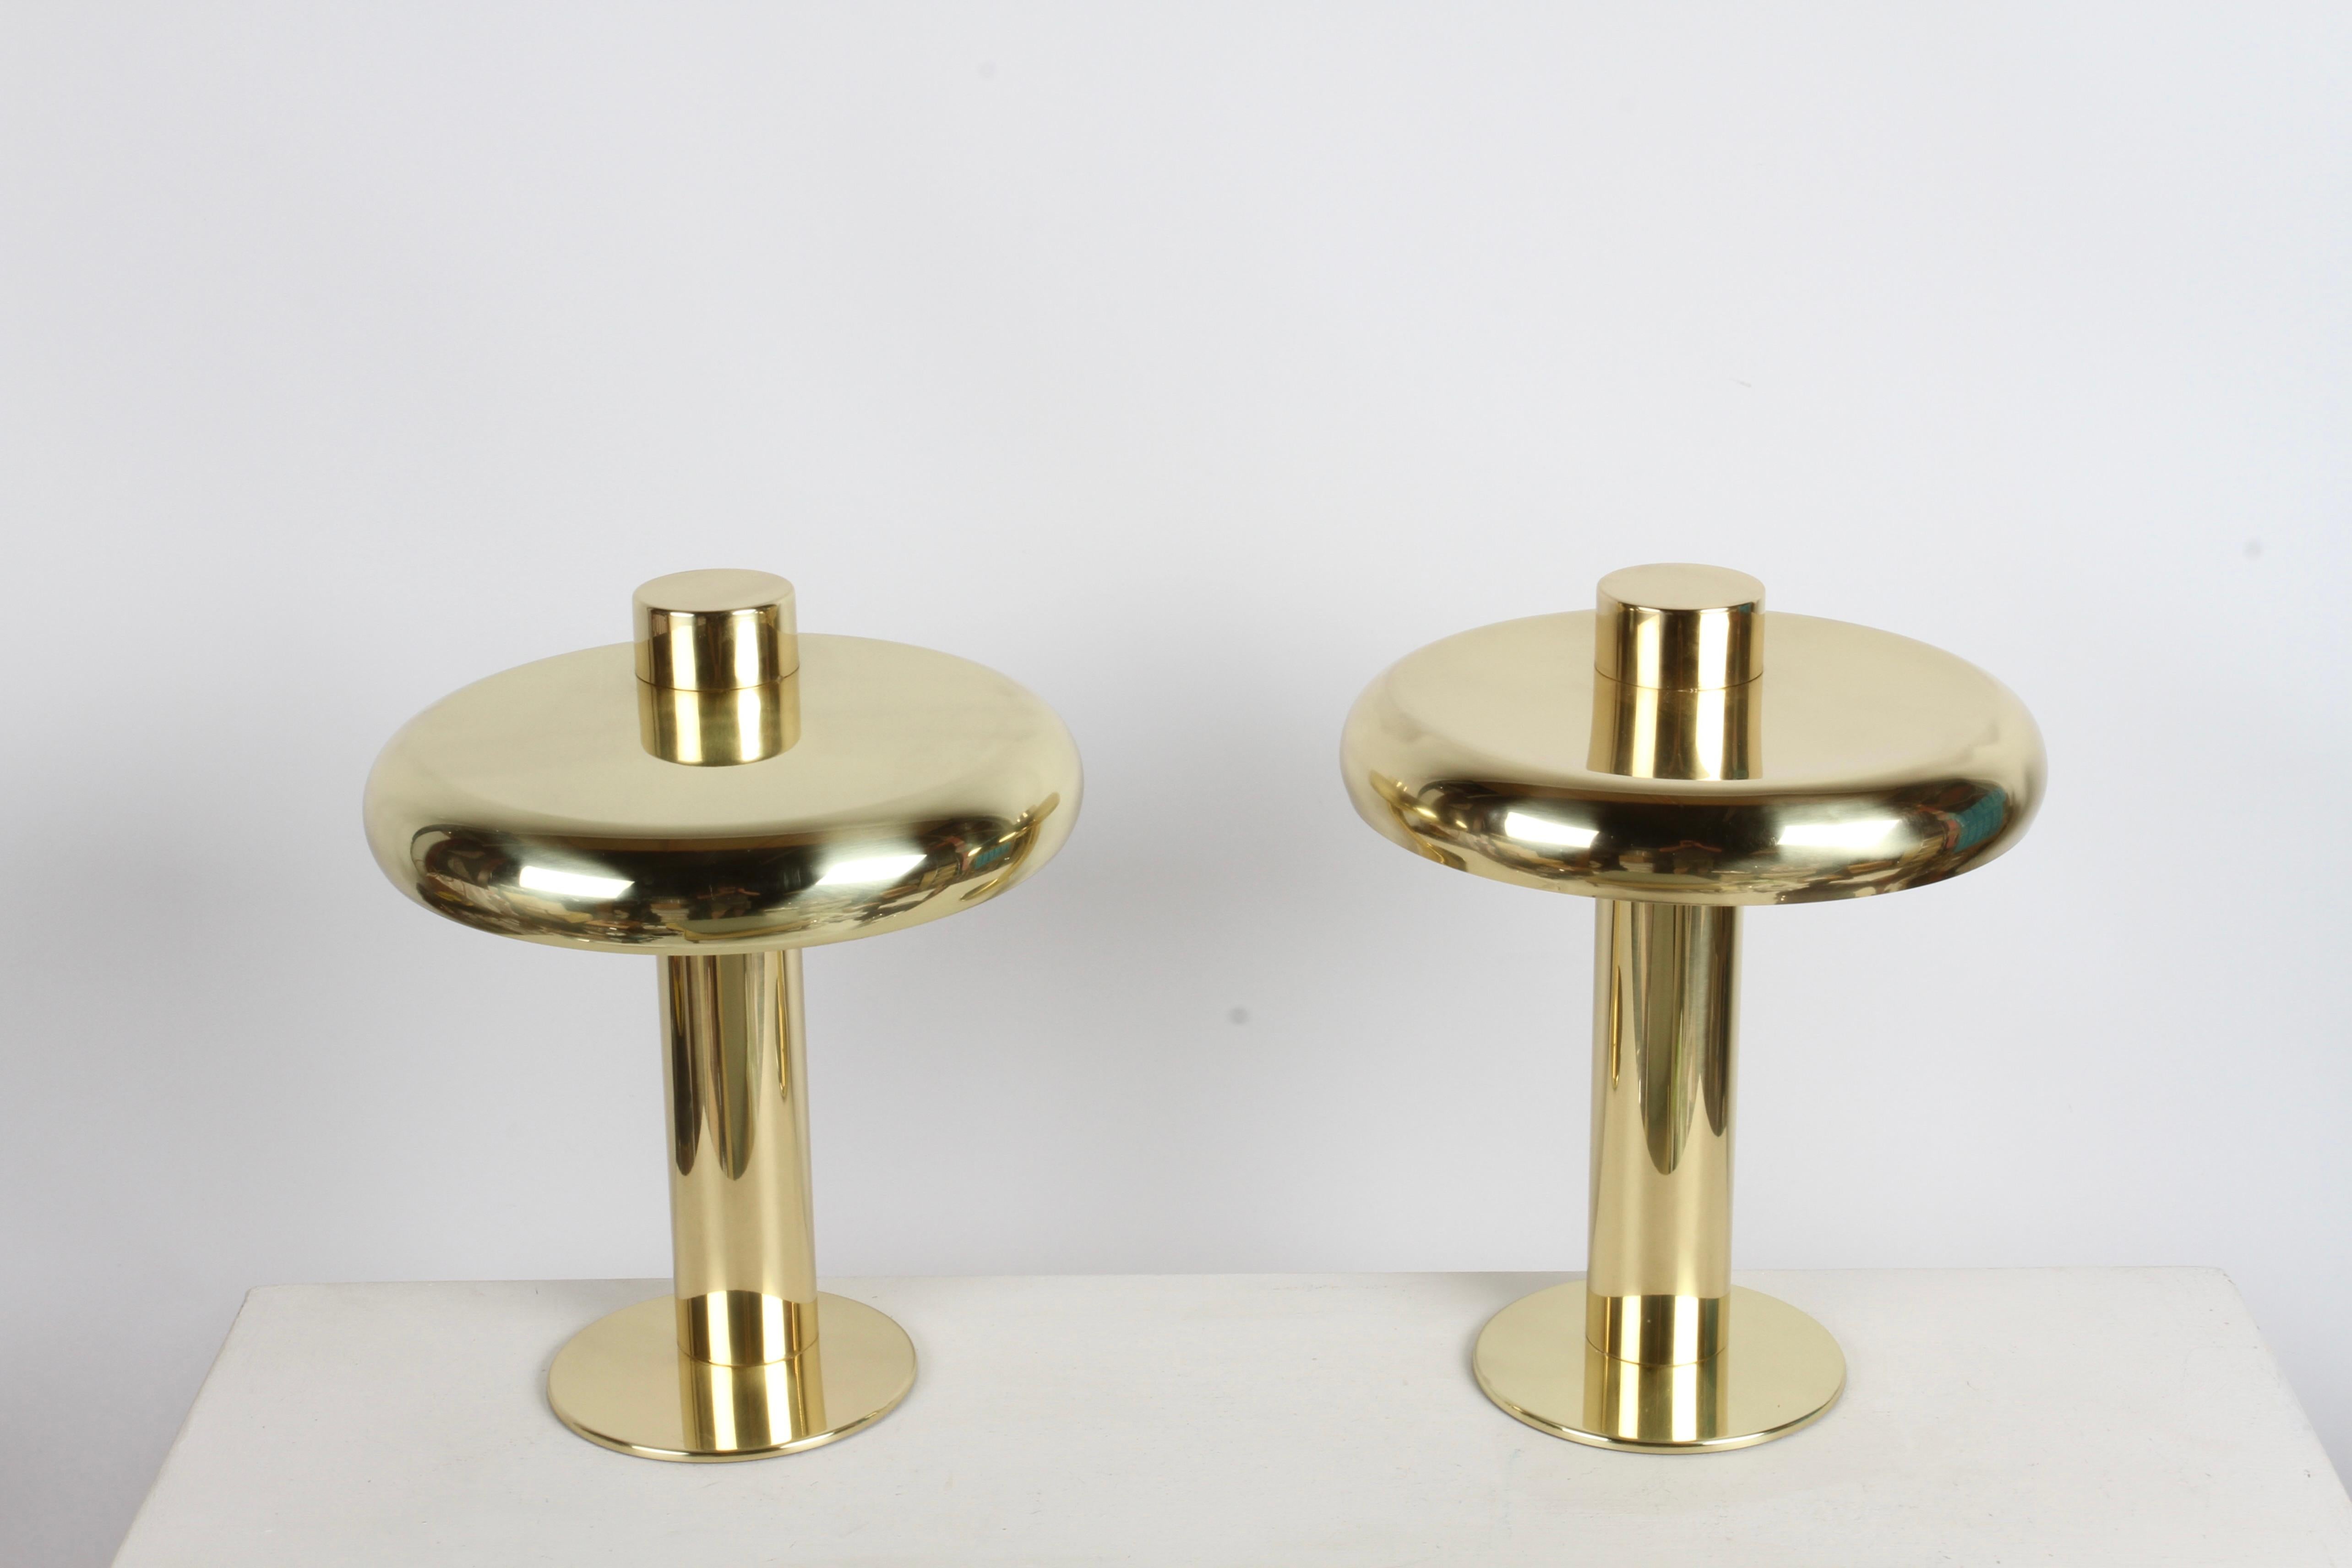 RARE Pair of Koch & Lowy, brass saucer form table lamps with great 1970s vibe, recently professionally restored. The brass has been polished to a softer tone, then clear lacquered, The sockets have been updated, new wire, plug and on/off inline